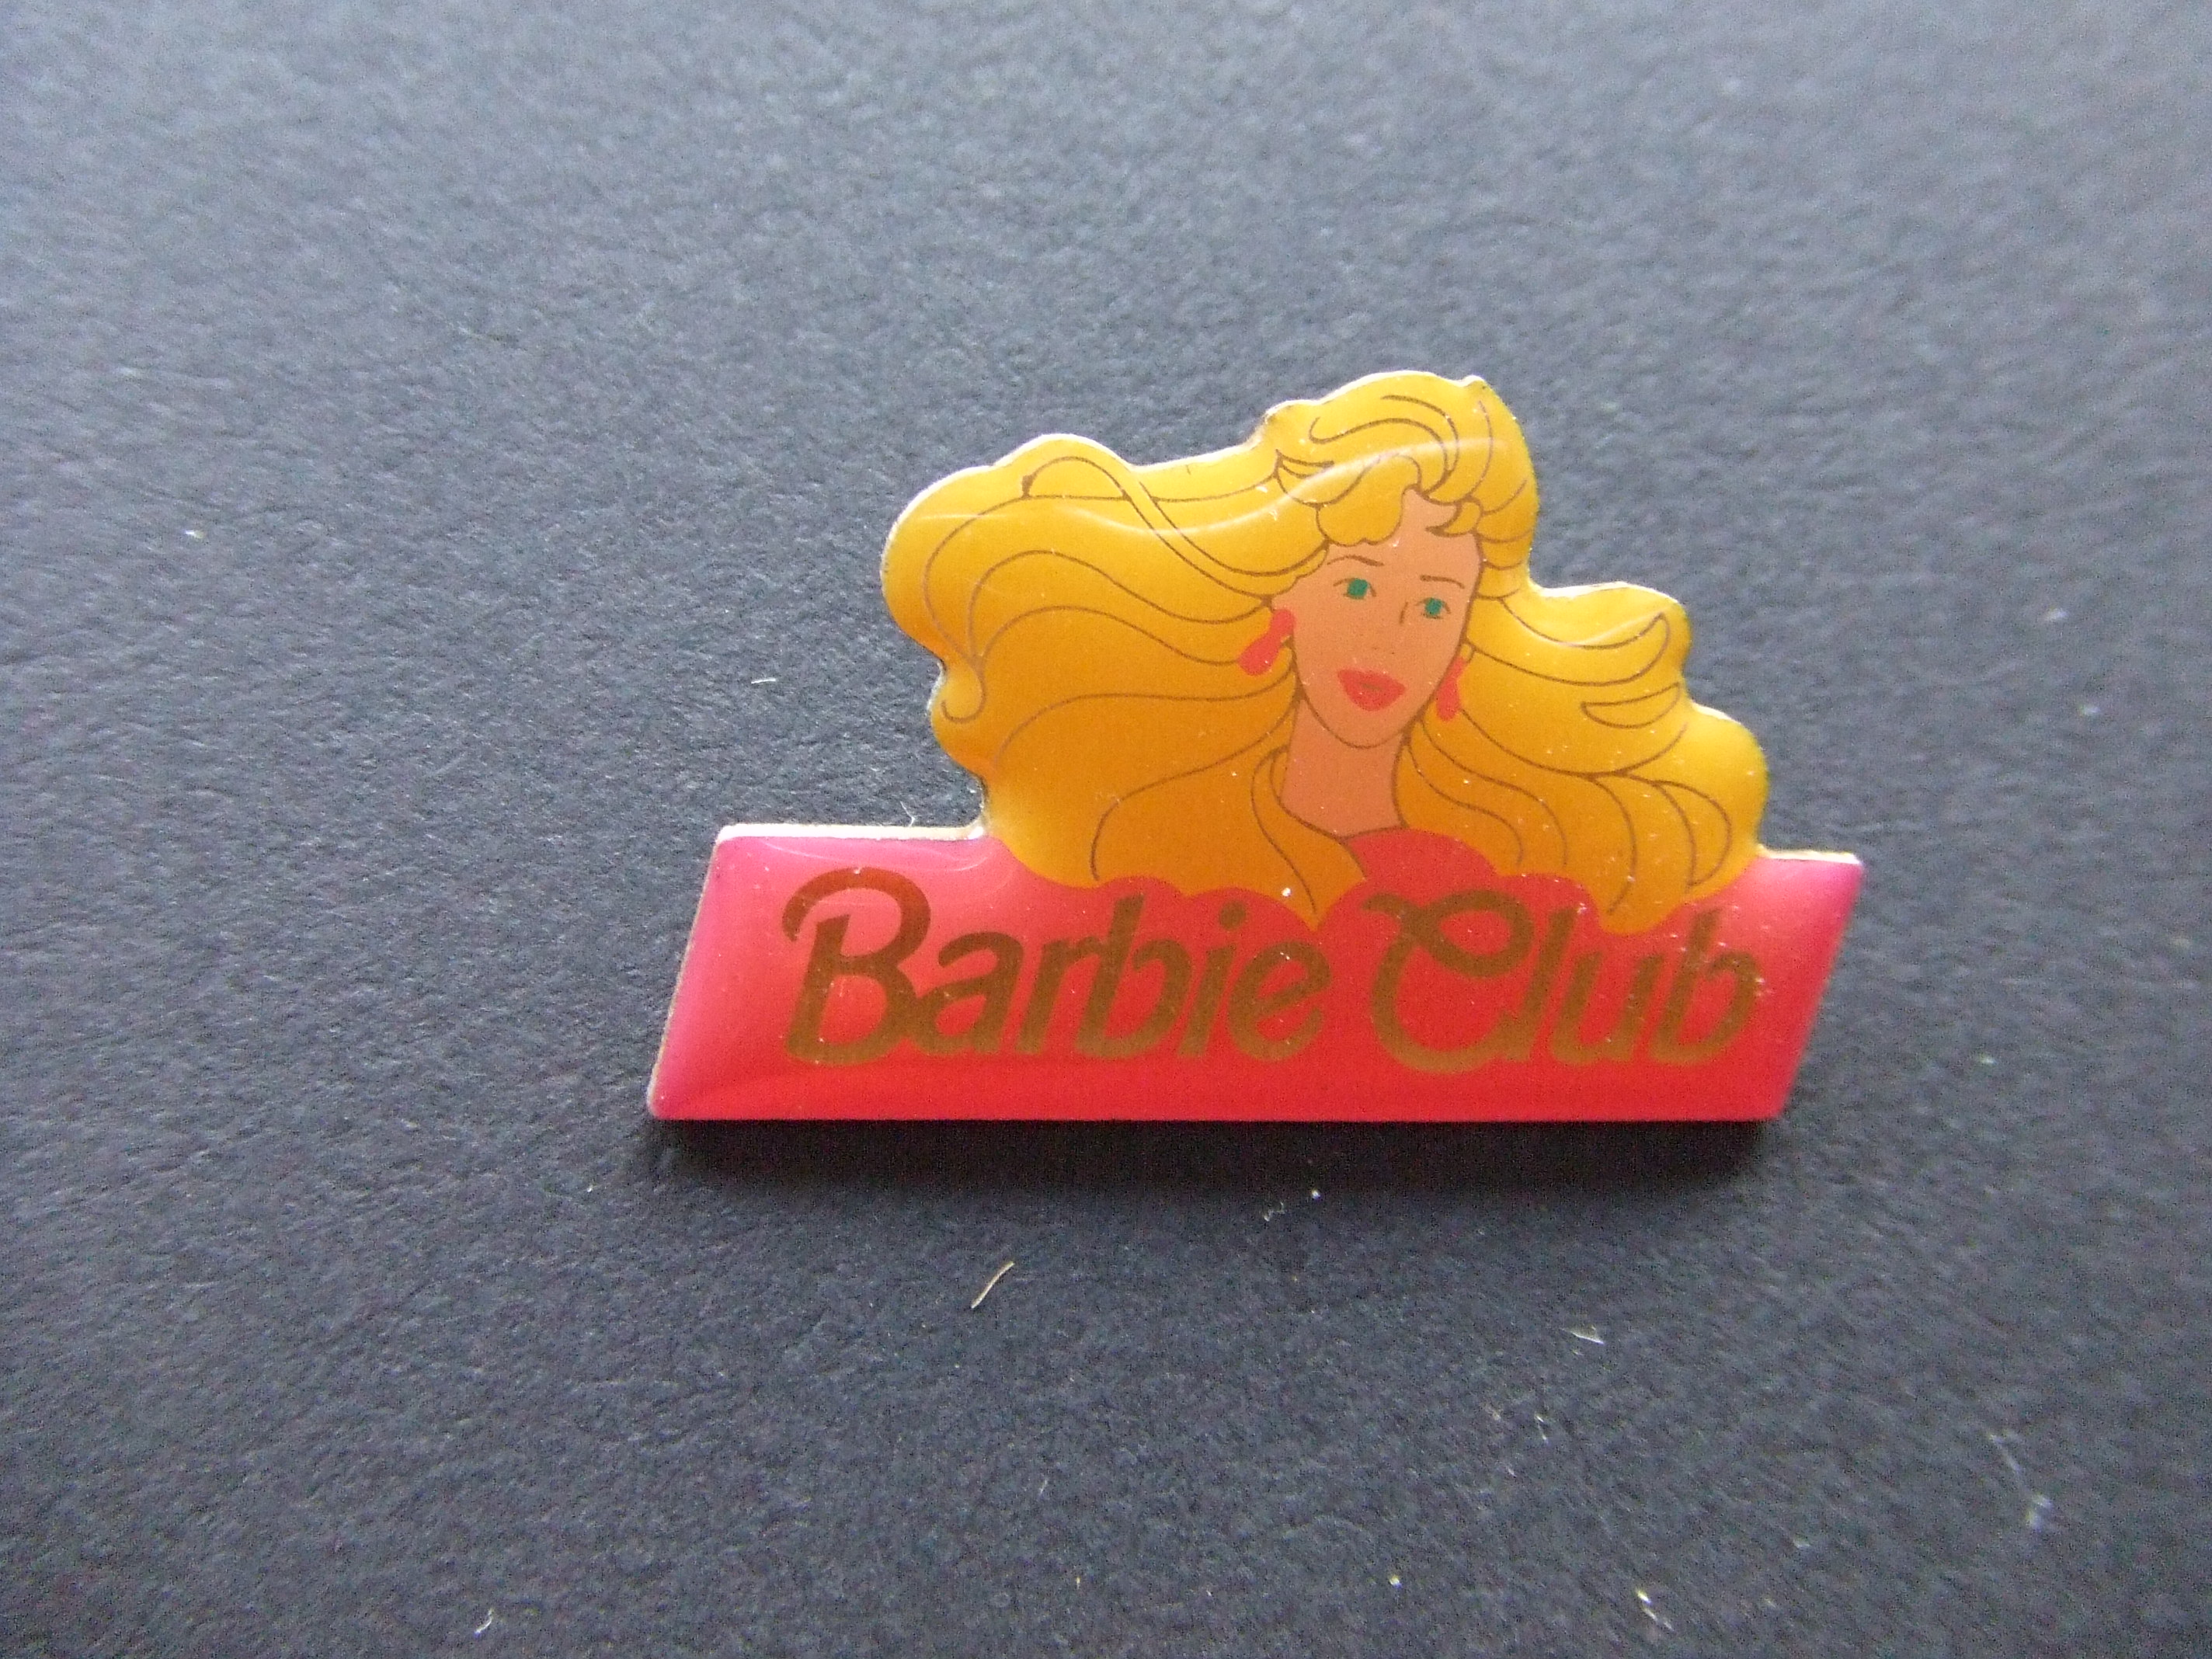 Barbie Club. emaille